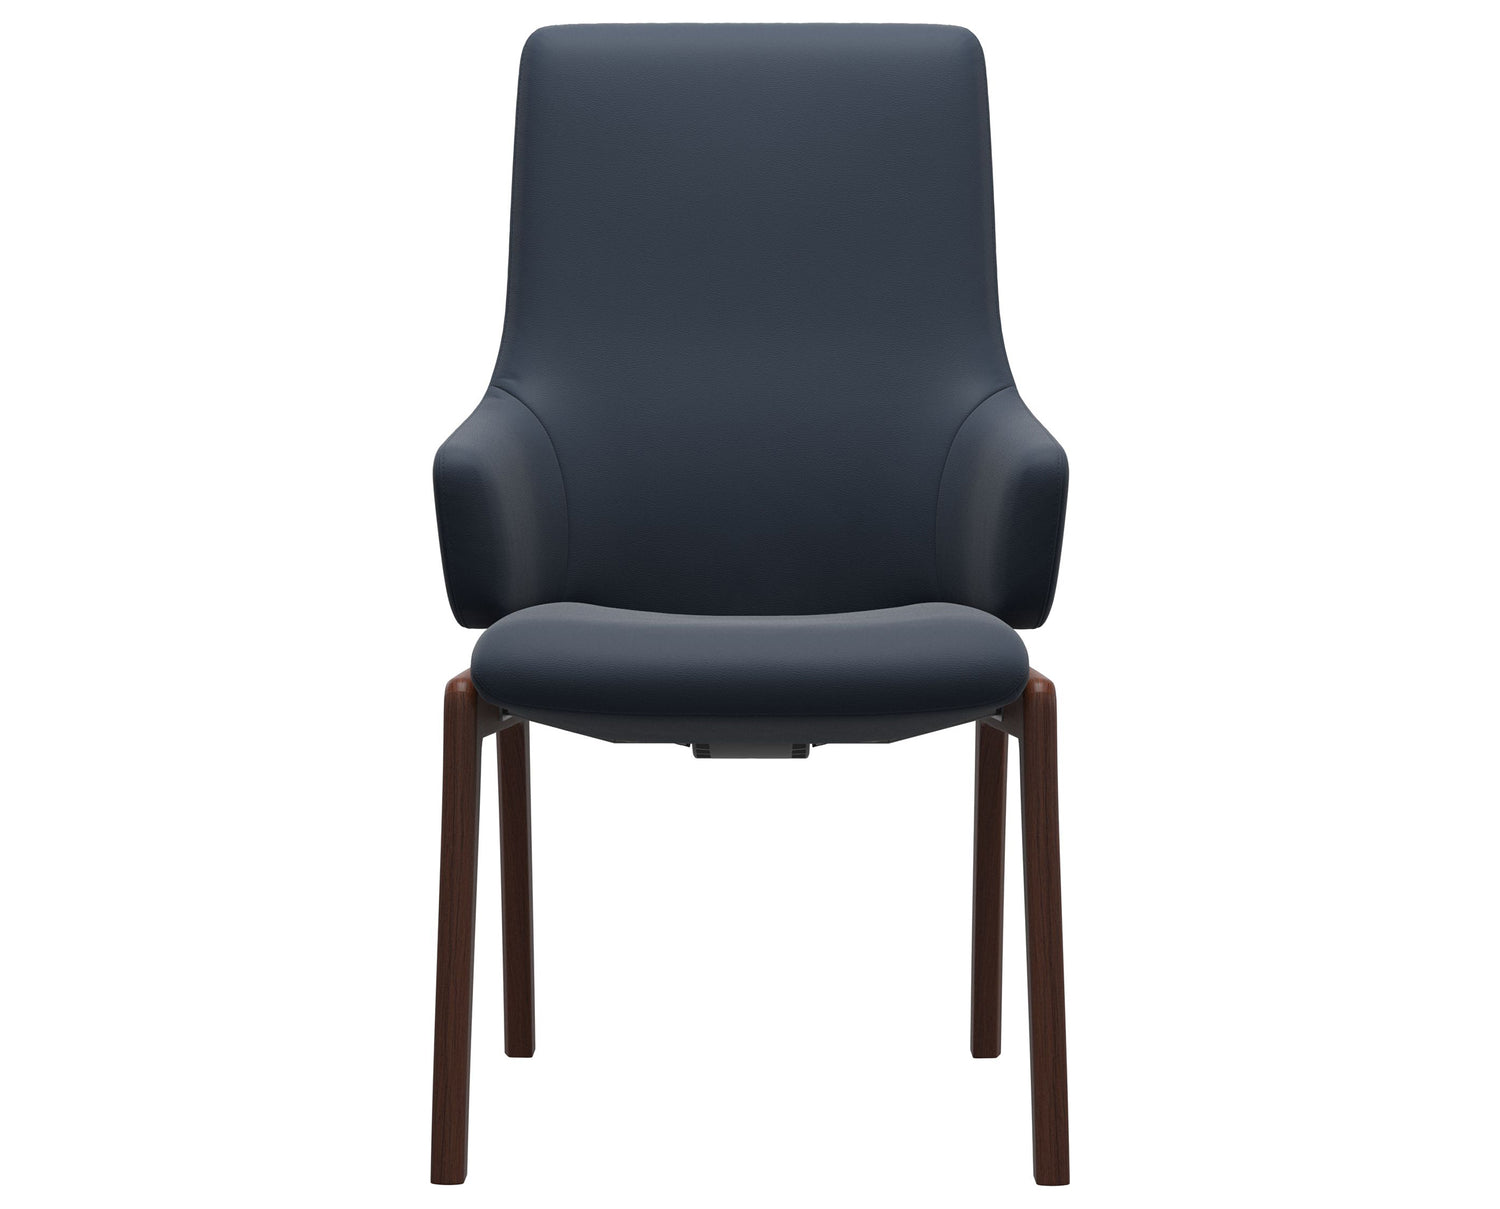 Paloma Leather Oxford Blue & Walnut Base | Stressless Laurel High Back D100 Dining Chair w/Arms | Valley Ridge Furniture